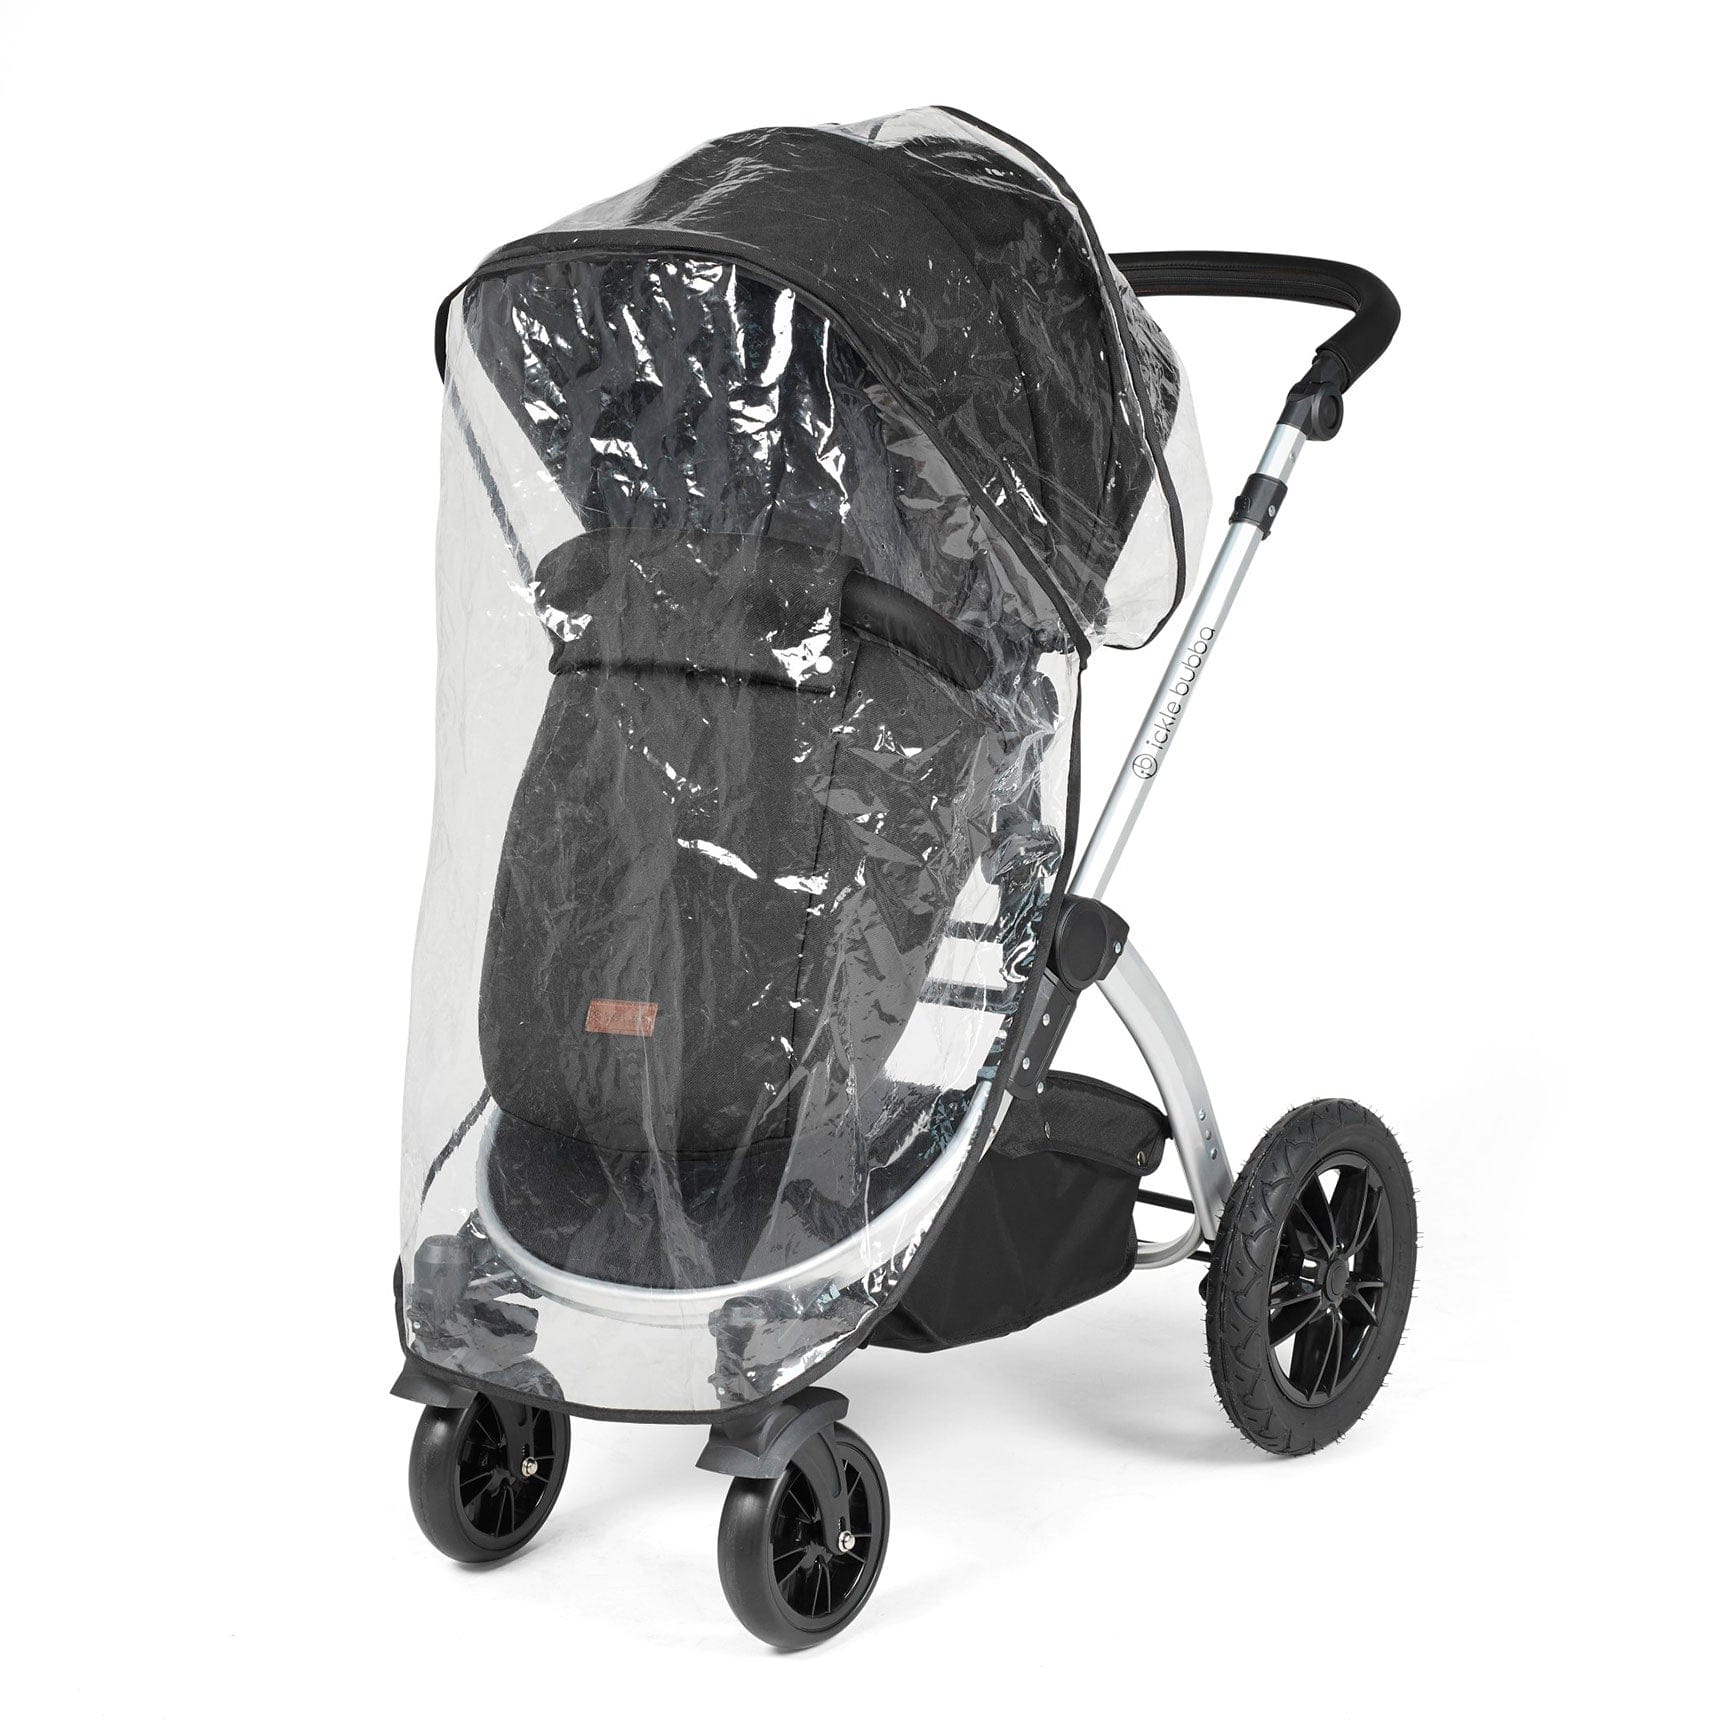 Ickle Bubba Stomp Luxe All-in-One Travel System with Isofix Base in Silver/Midnight/Black Travel Systems 10-011-300-249 5056515026535